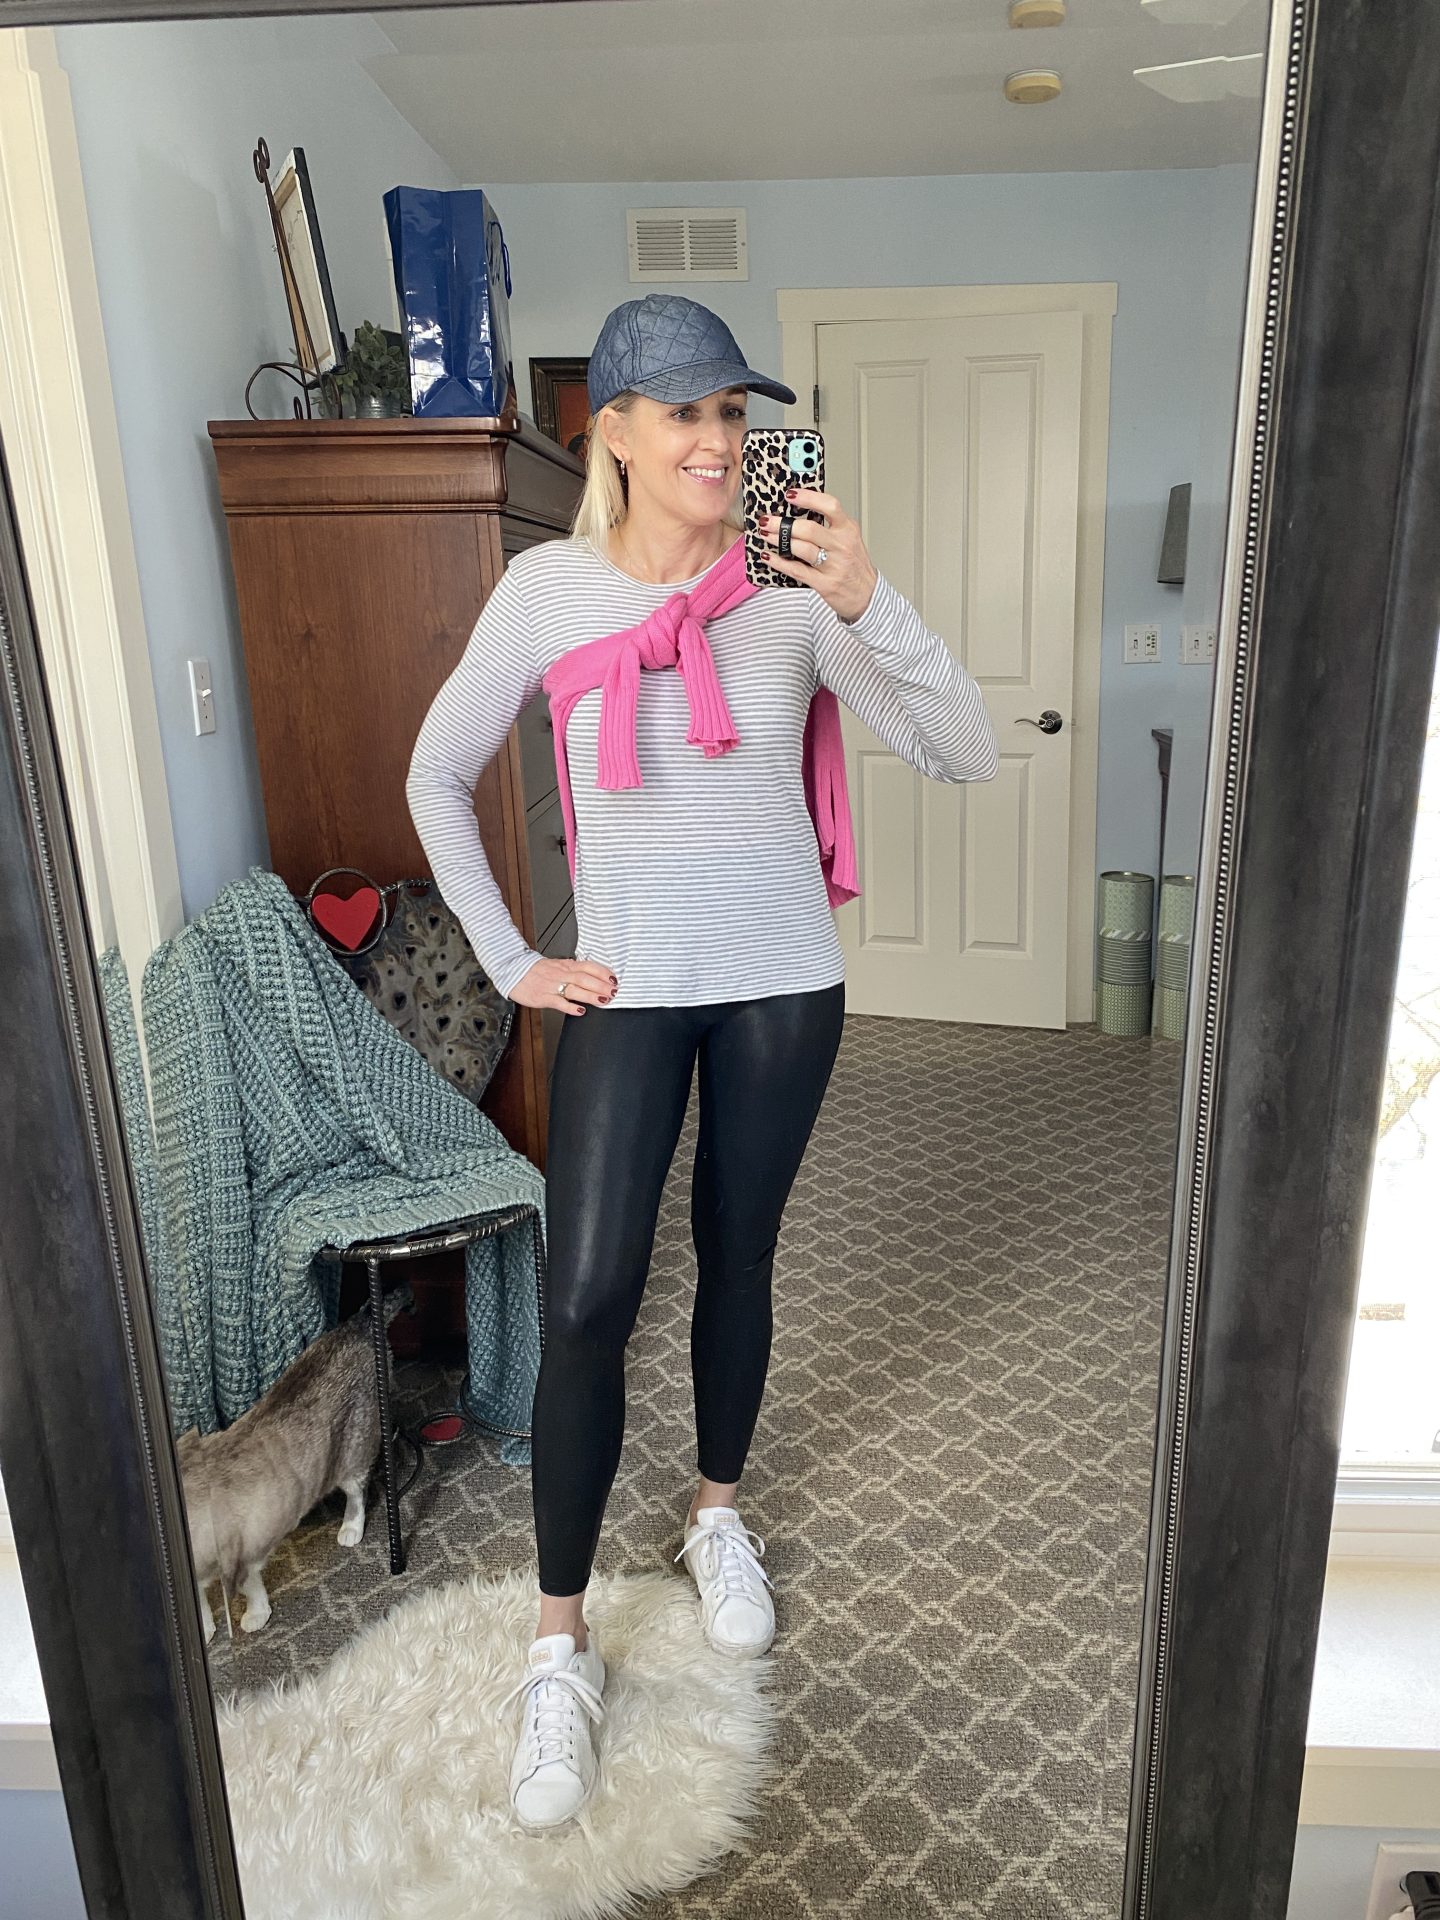 spanx leggings, striped tee and bright sweater